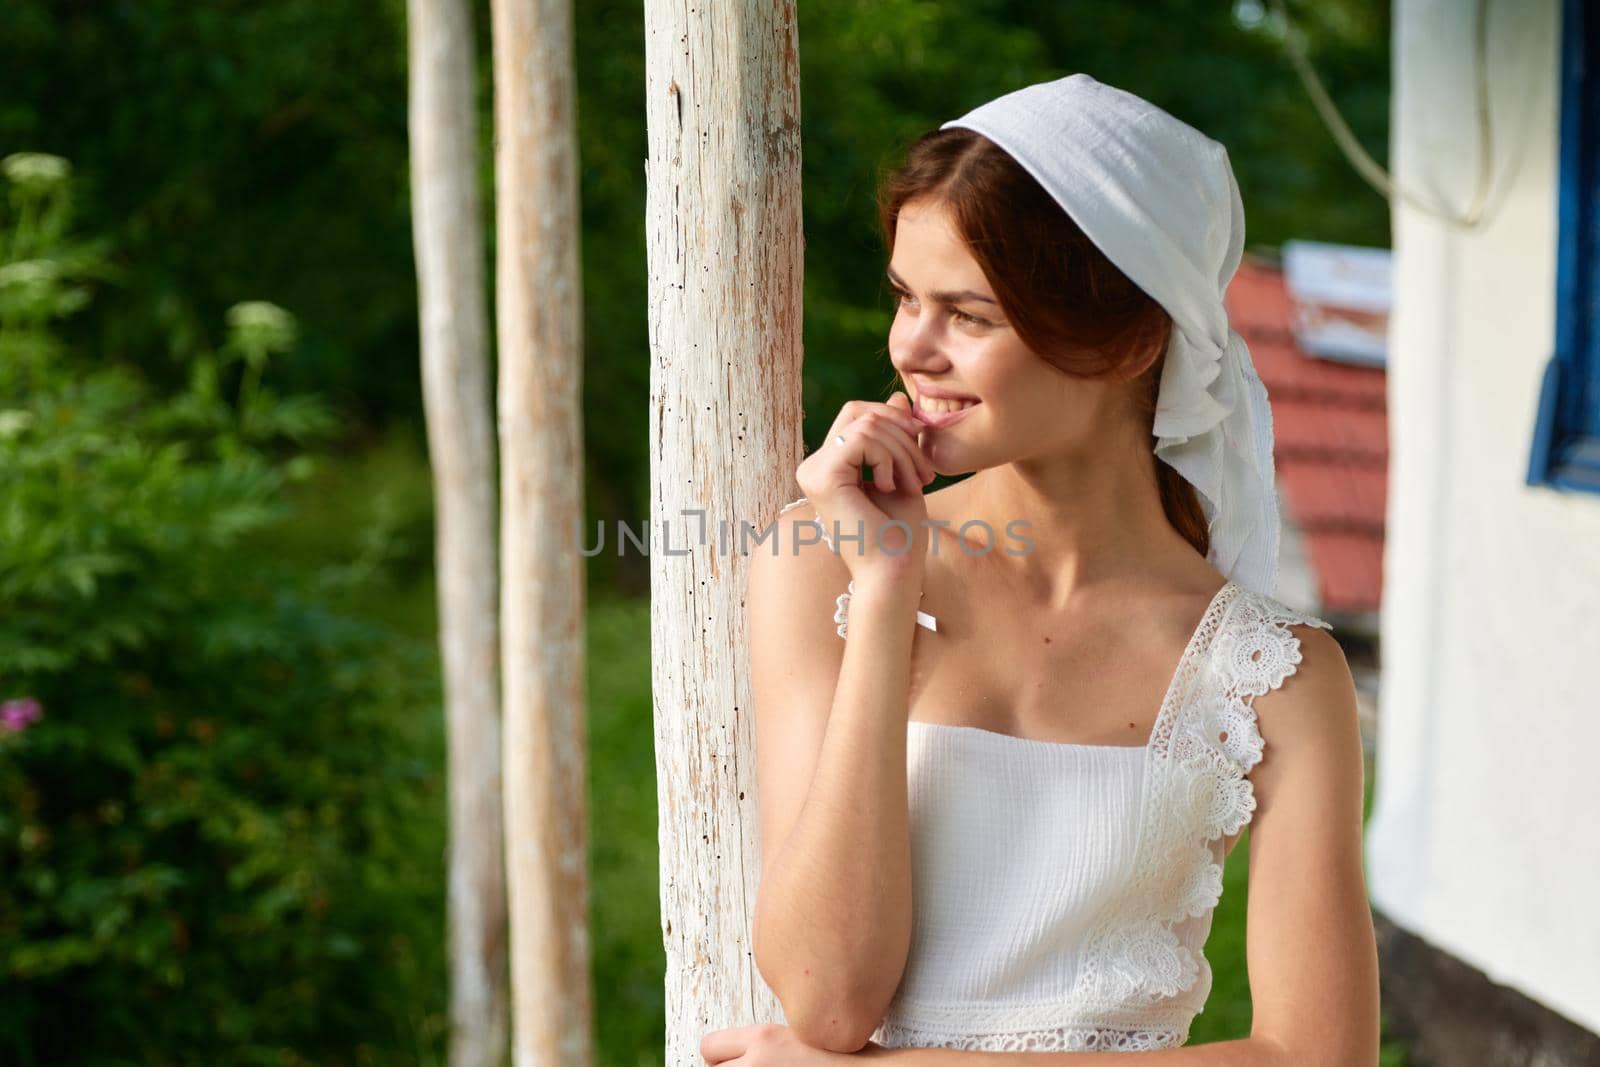 Woman in white dress countryside village nature ecology. High quality photo